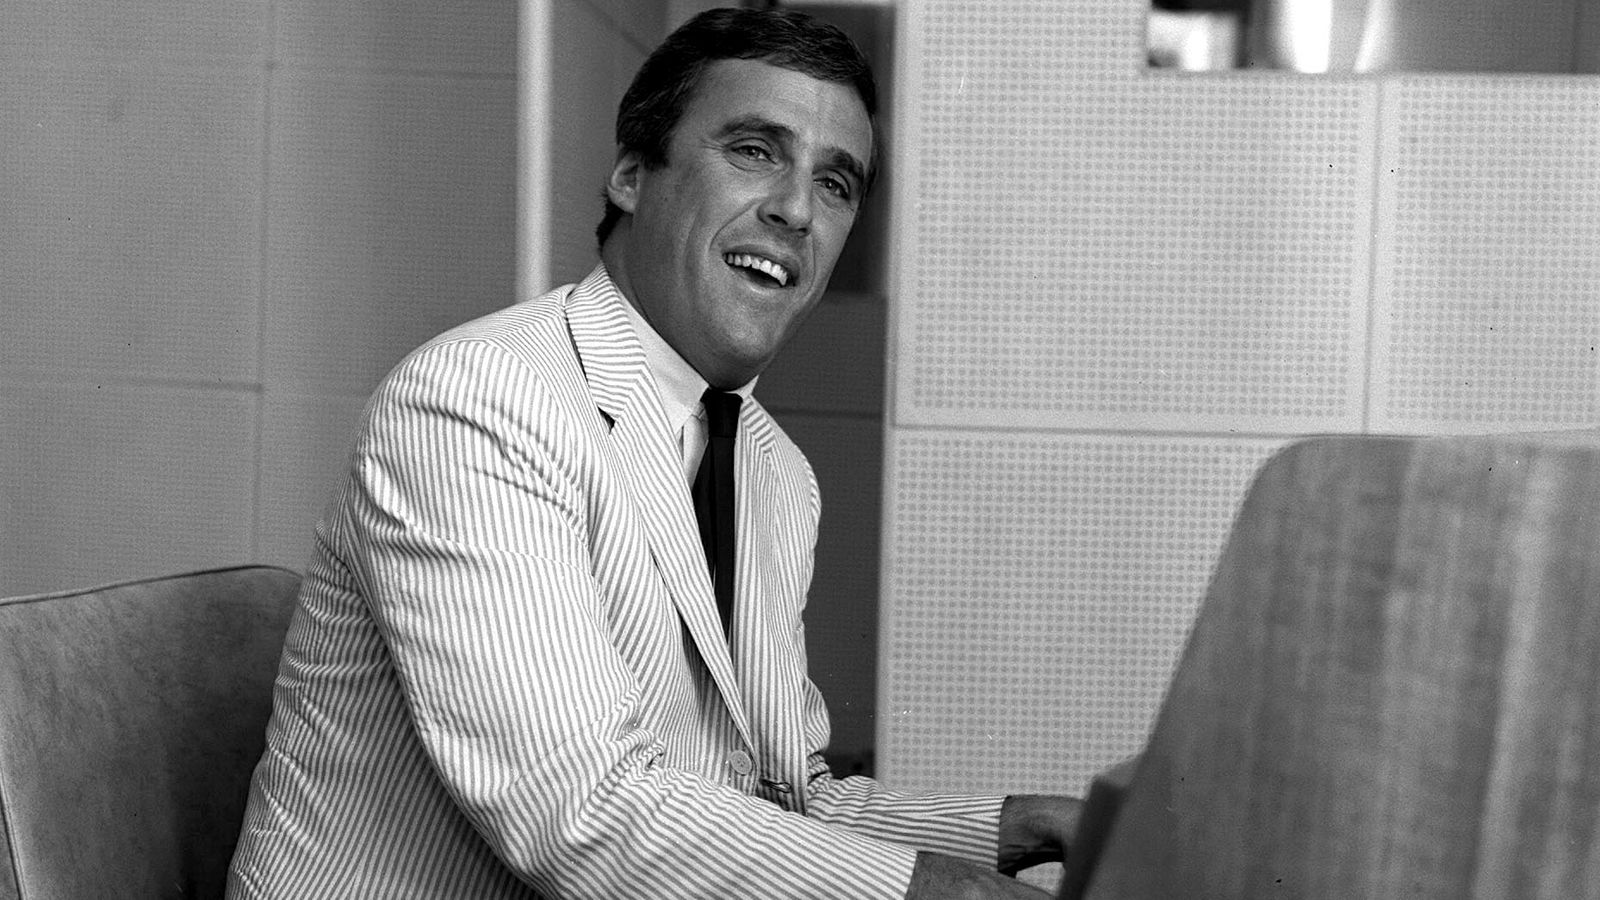 Burt Bacharach obituary: Composer worked with stars including Dionne Warwick, Dusty Springfield and Tom Jones during seven-decade career